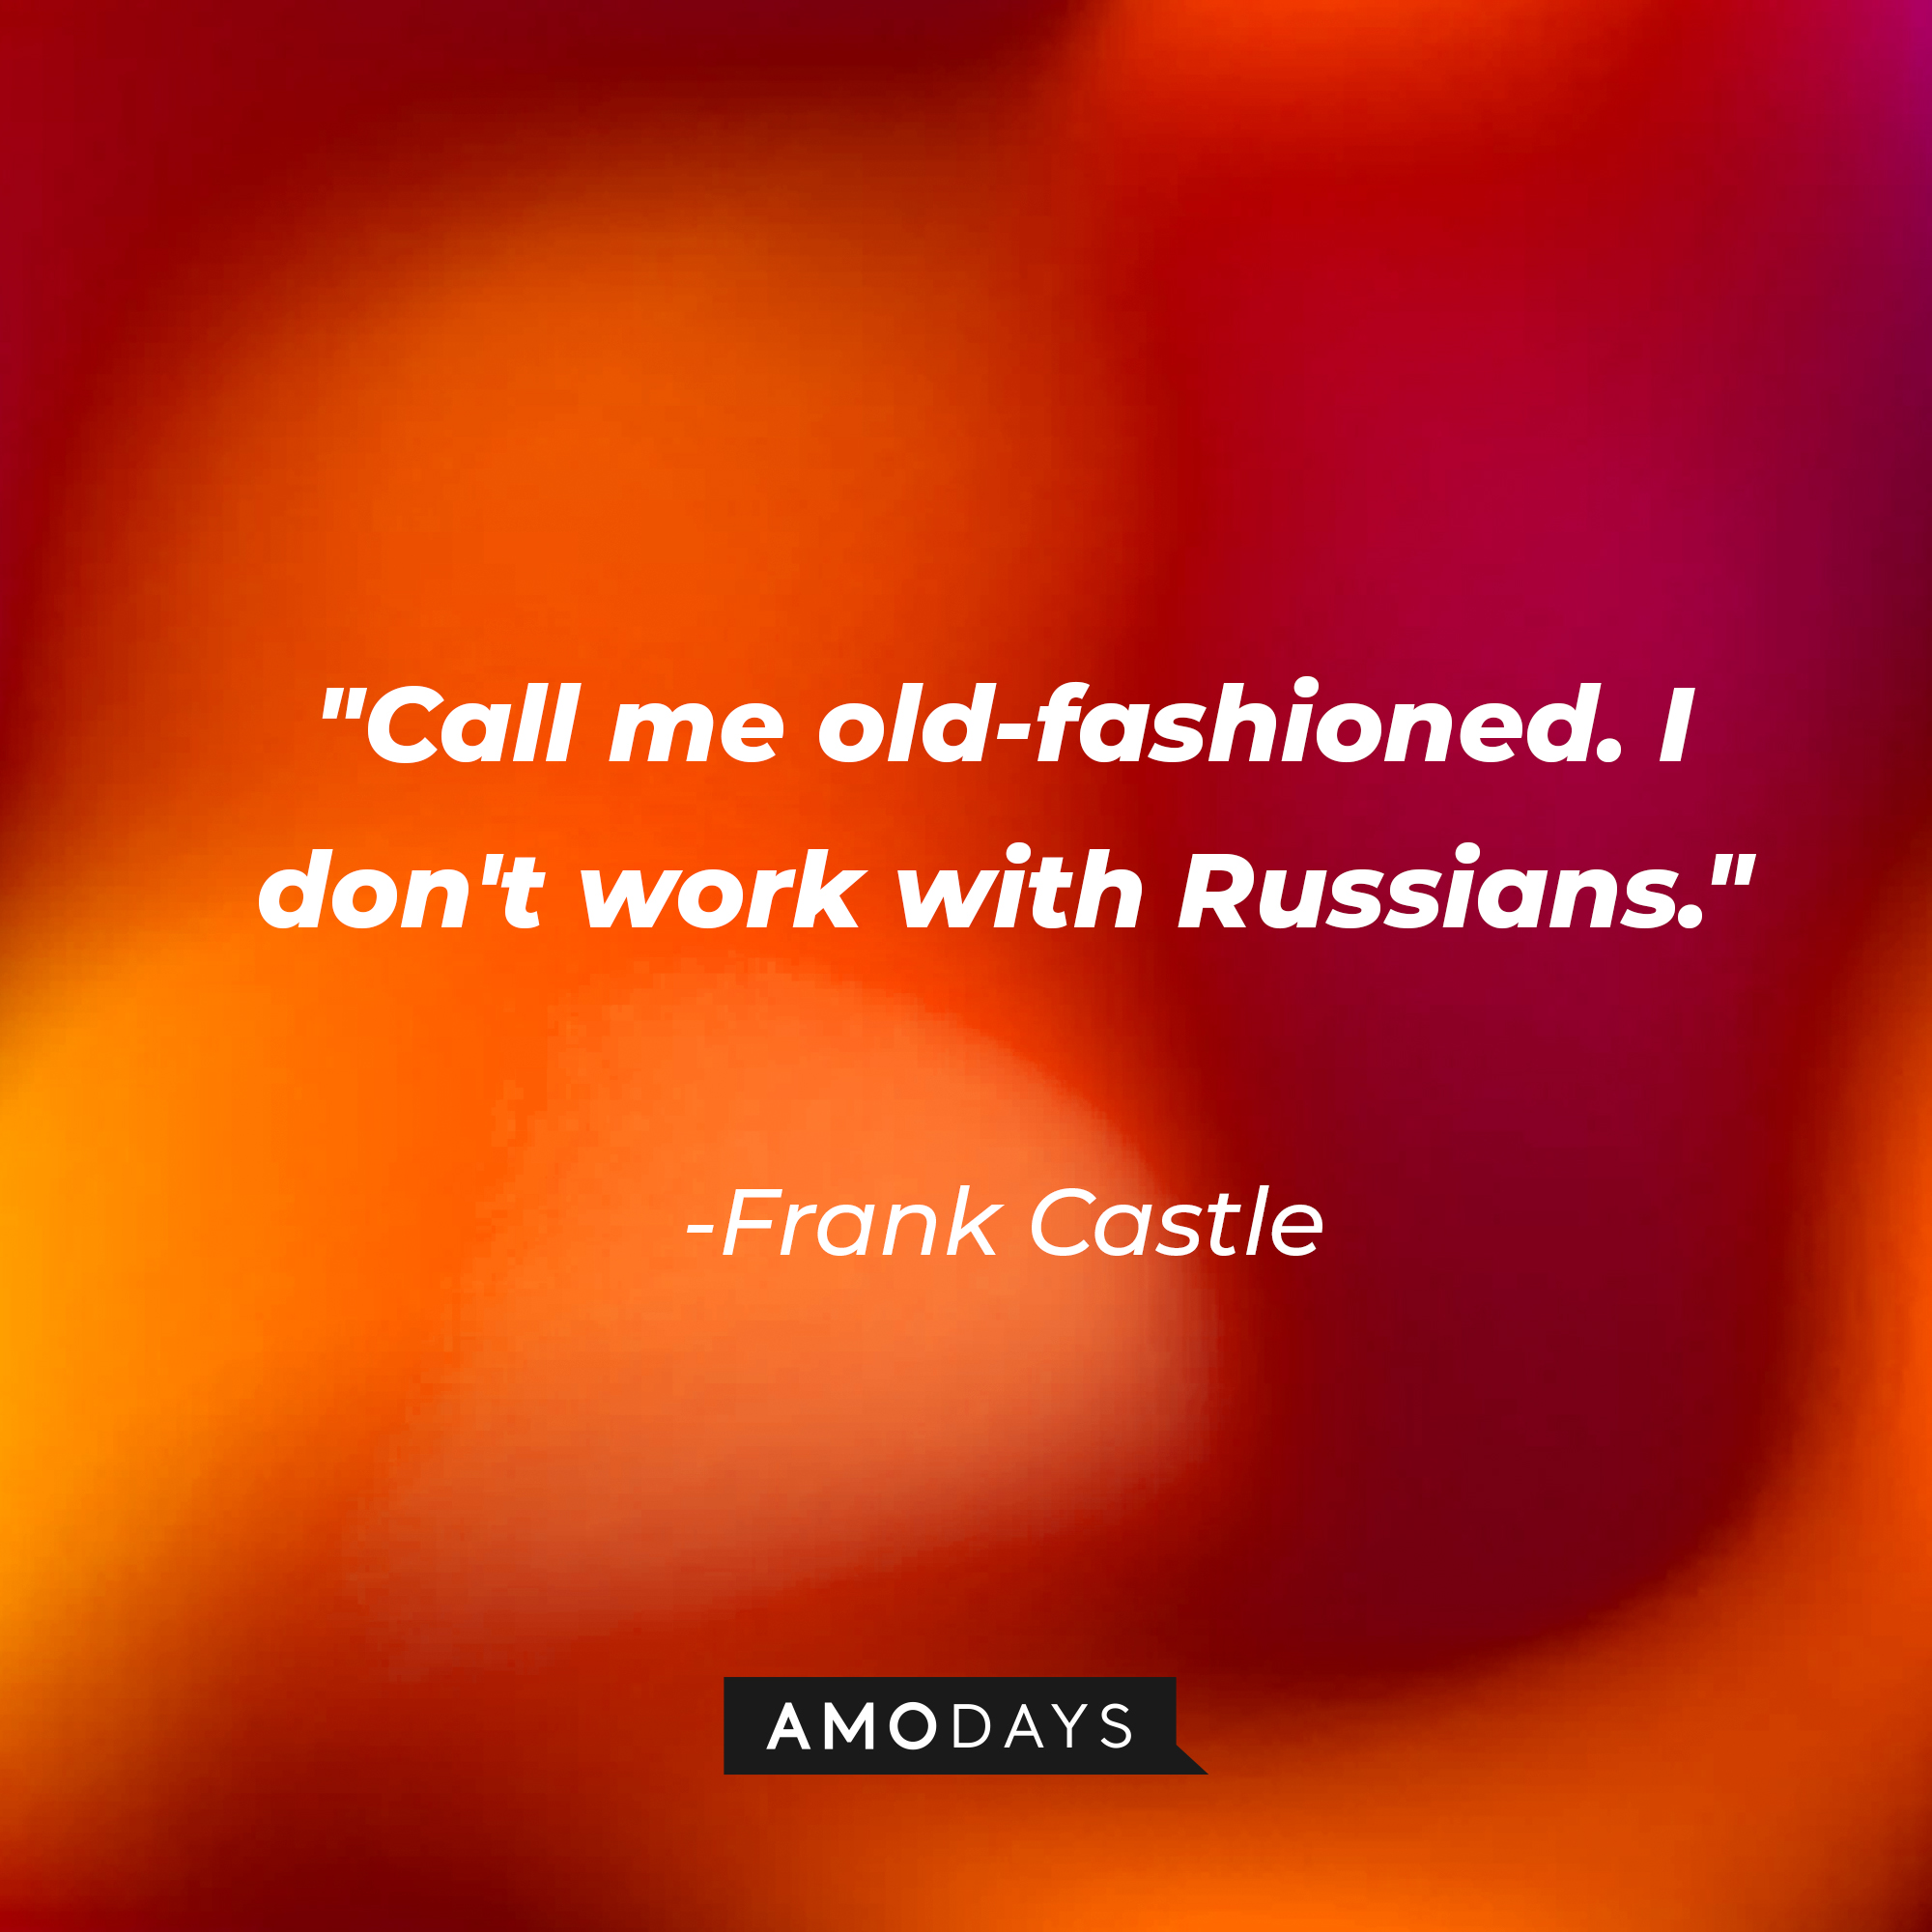 Frank Castle's quote: "Call me old-fashioned. I don't work with Russians." | Source: AmoDays